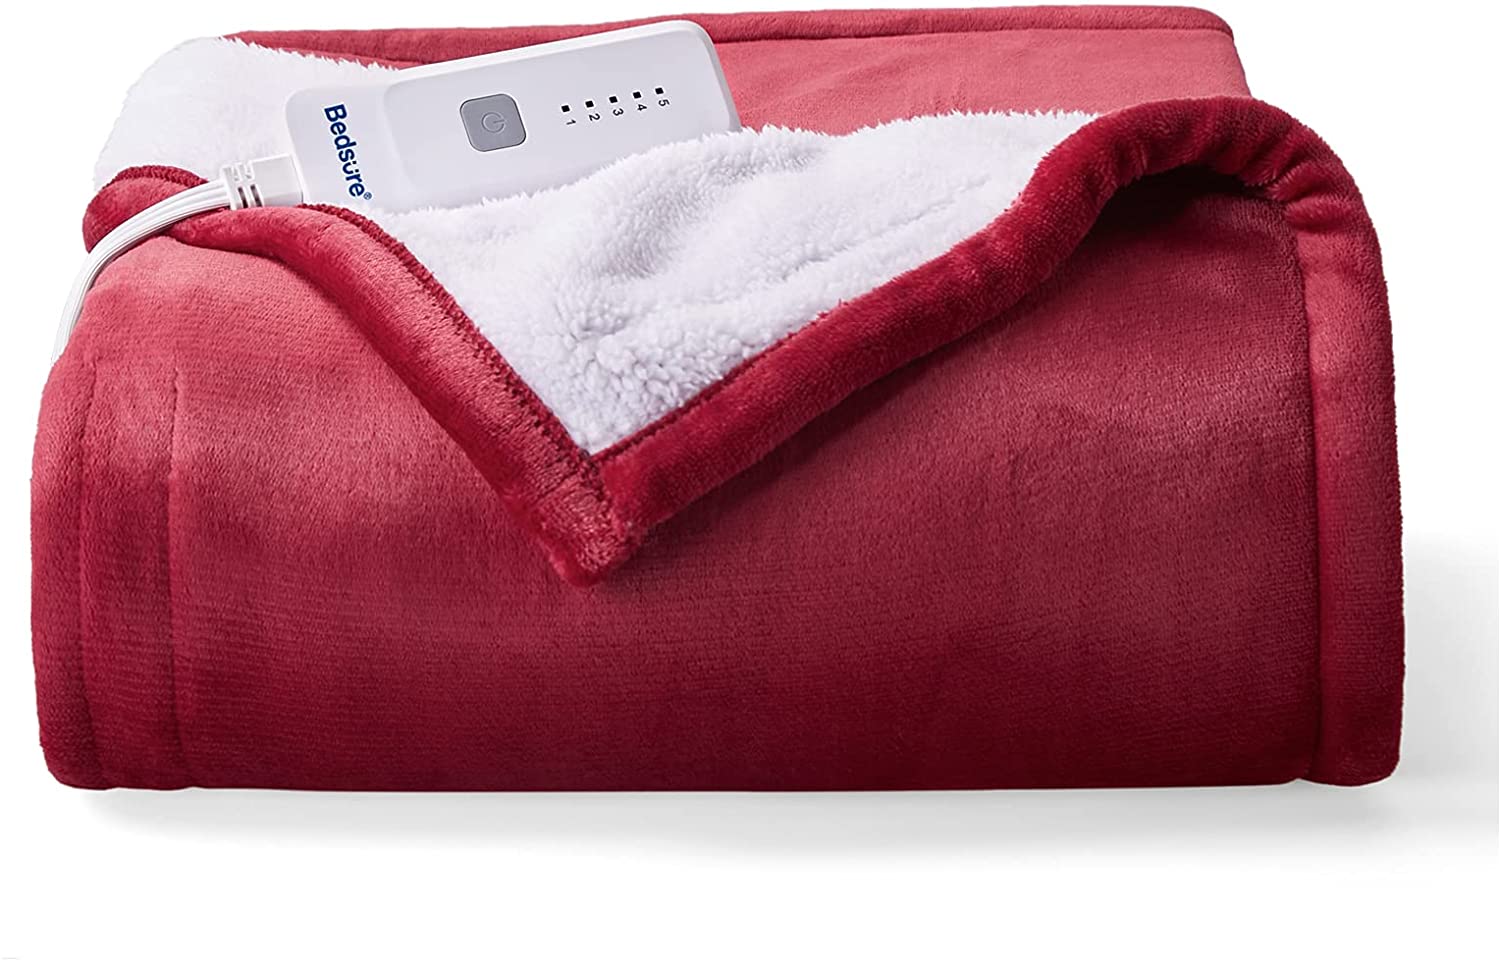 Bedsure Soft Electric Heated Blanket With 5 Heat Settings (50*60Inch-Red) $32.49 + Free Shipping with Prime